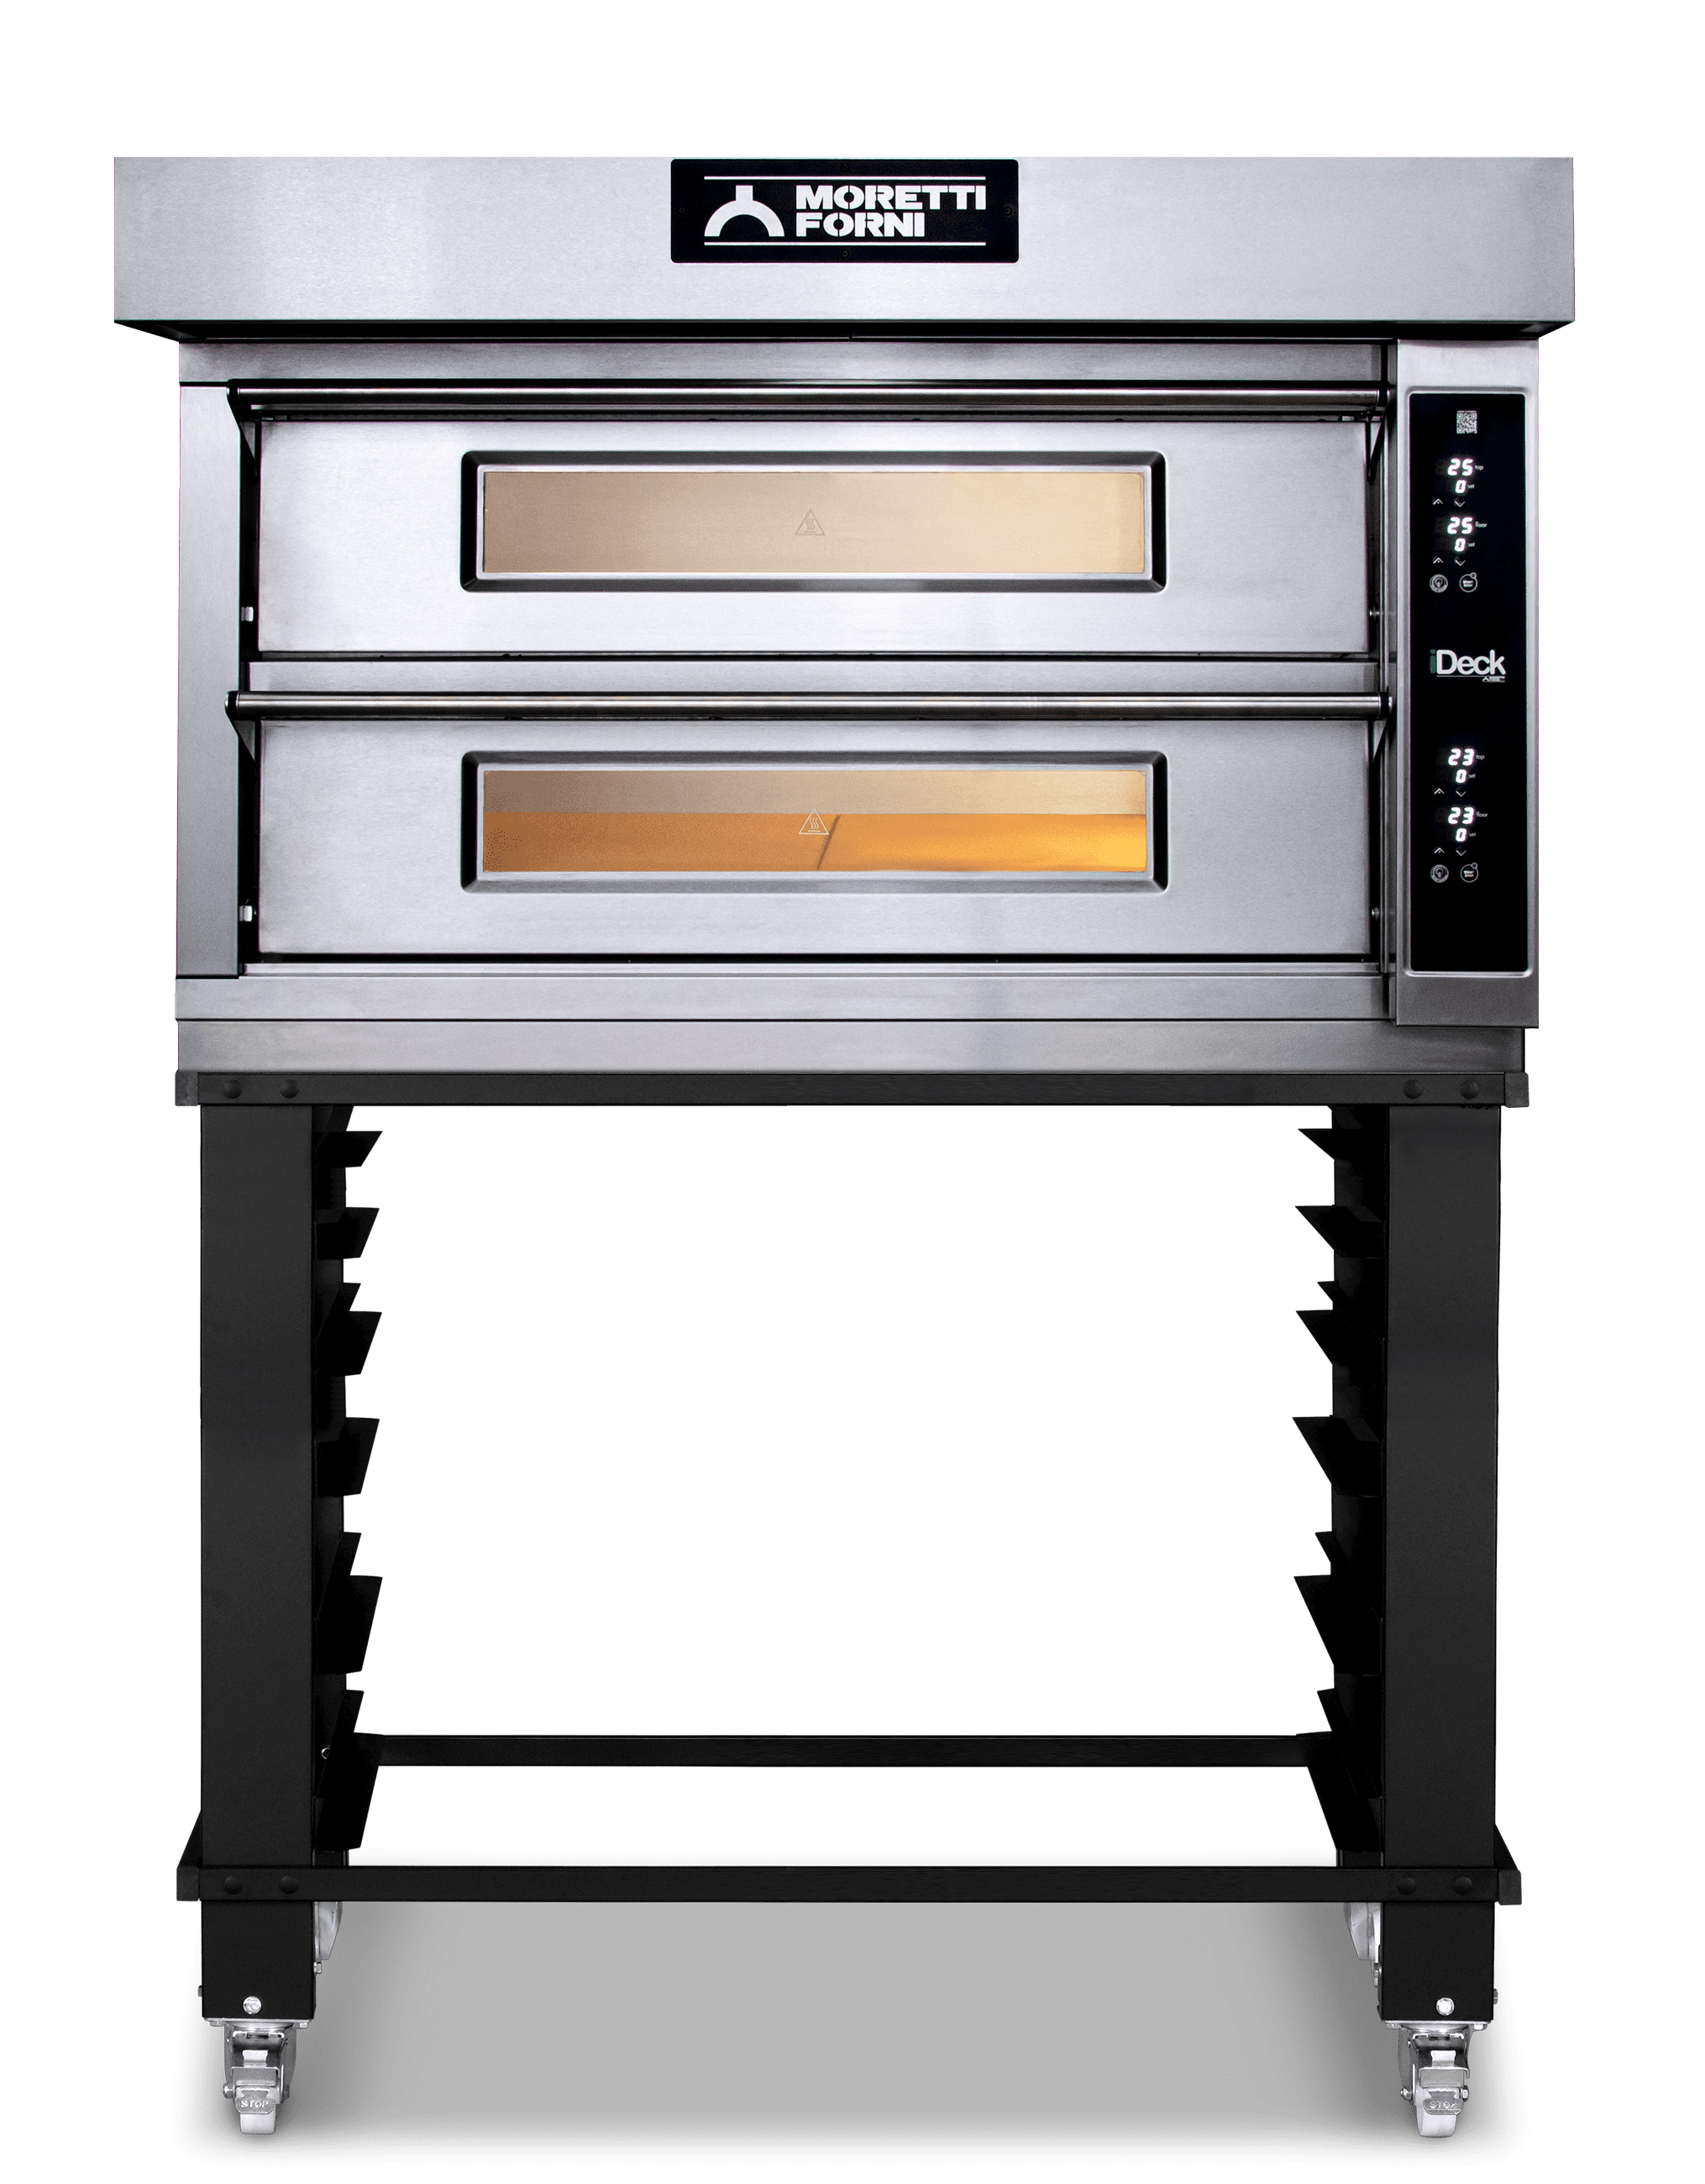 ID-D 105.105 iDeck Electronic Control Electric Pizza Oven 41"W x 41"D (Internal) Chamber. 2 Deck